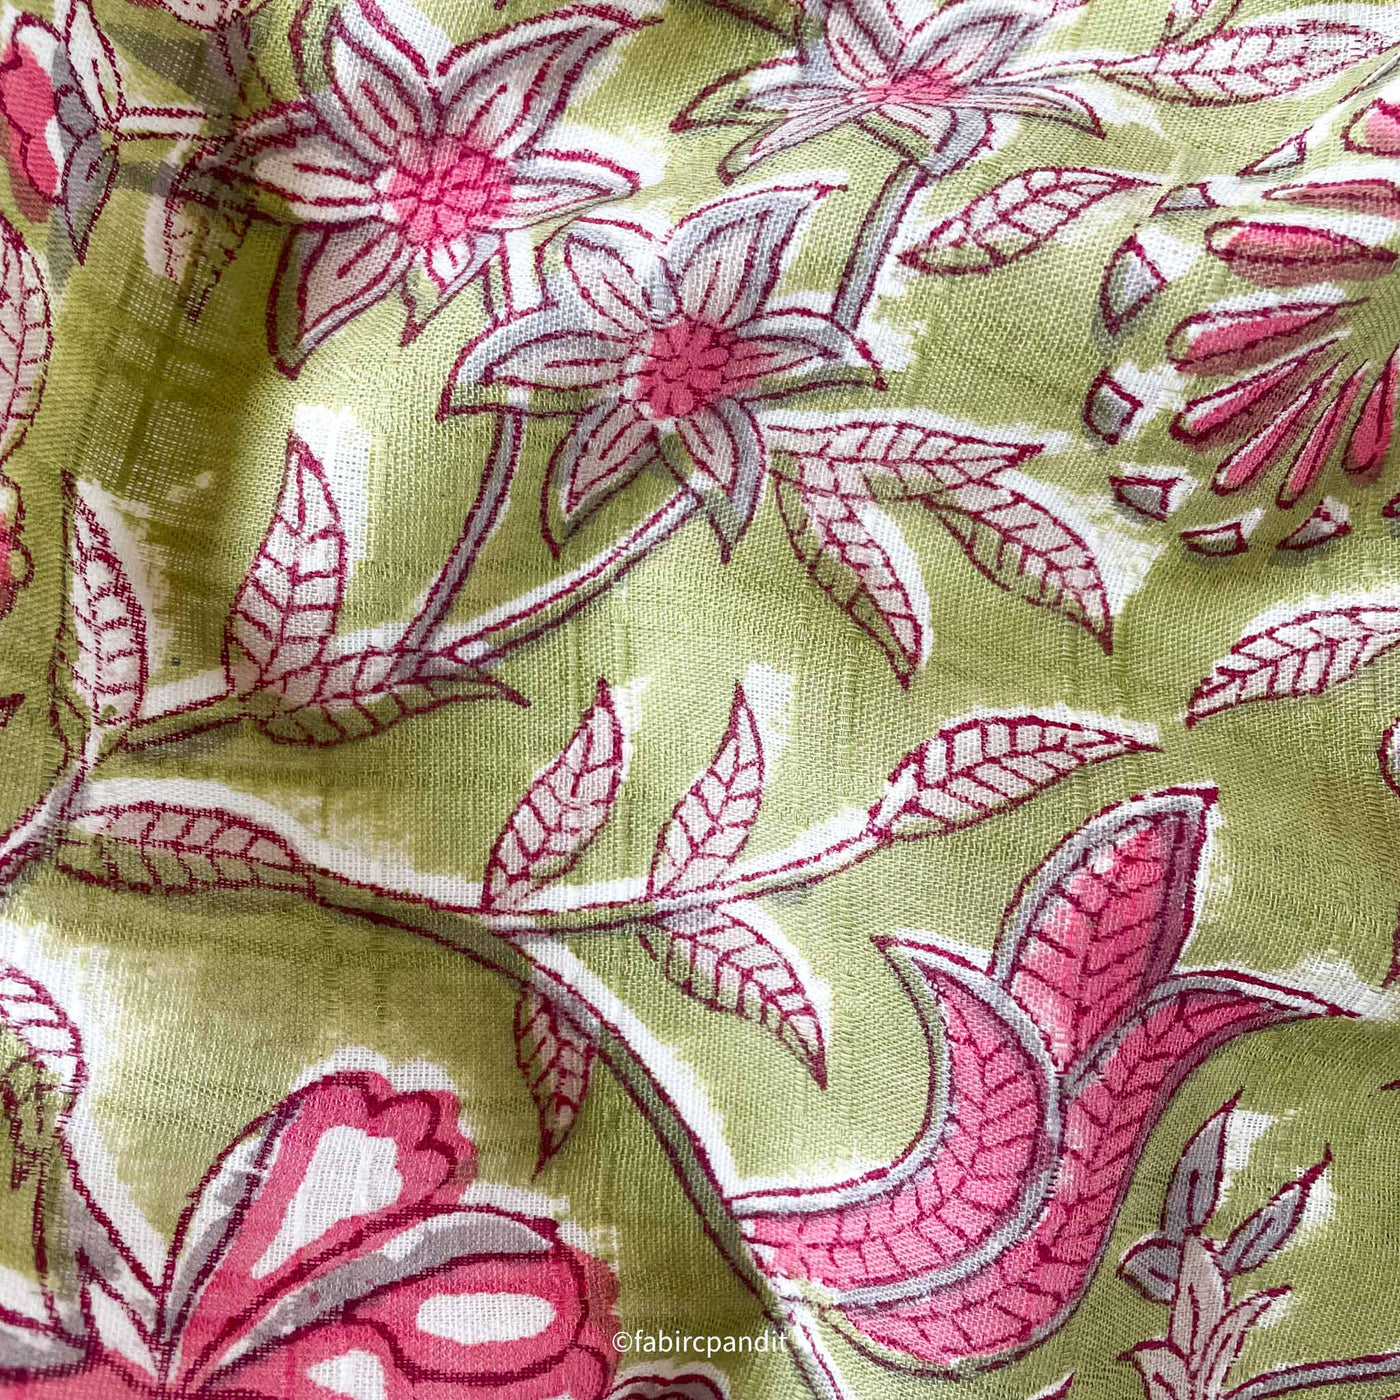 Fabric Pandit Fabric Women's Green and Pink Mughal Flower Garden | Hand Block Printed Pure Cotton Slub Kurta Fabric (2.5 meters) | Green and Pink Mughal Flower | Hand Block Printed Pure Cotton Slub Pyjama Fabric (2.5 meters) | Unstitched Combo Set